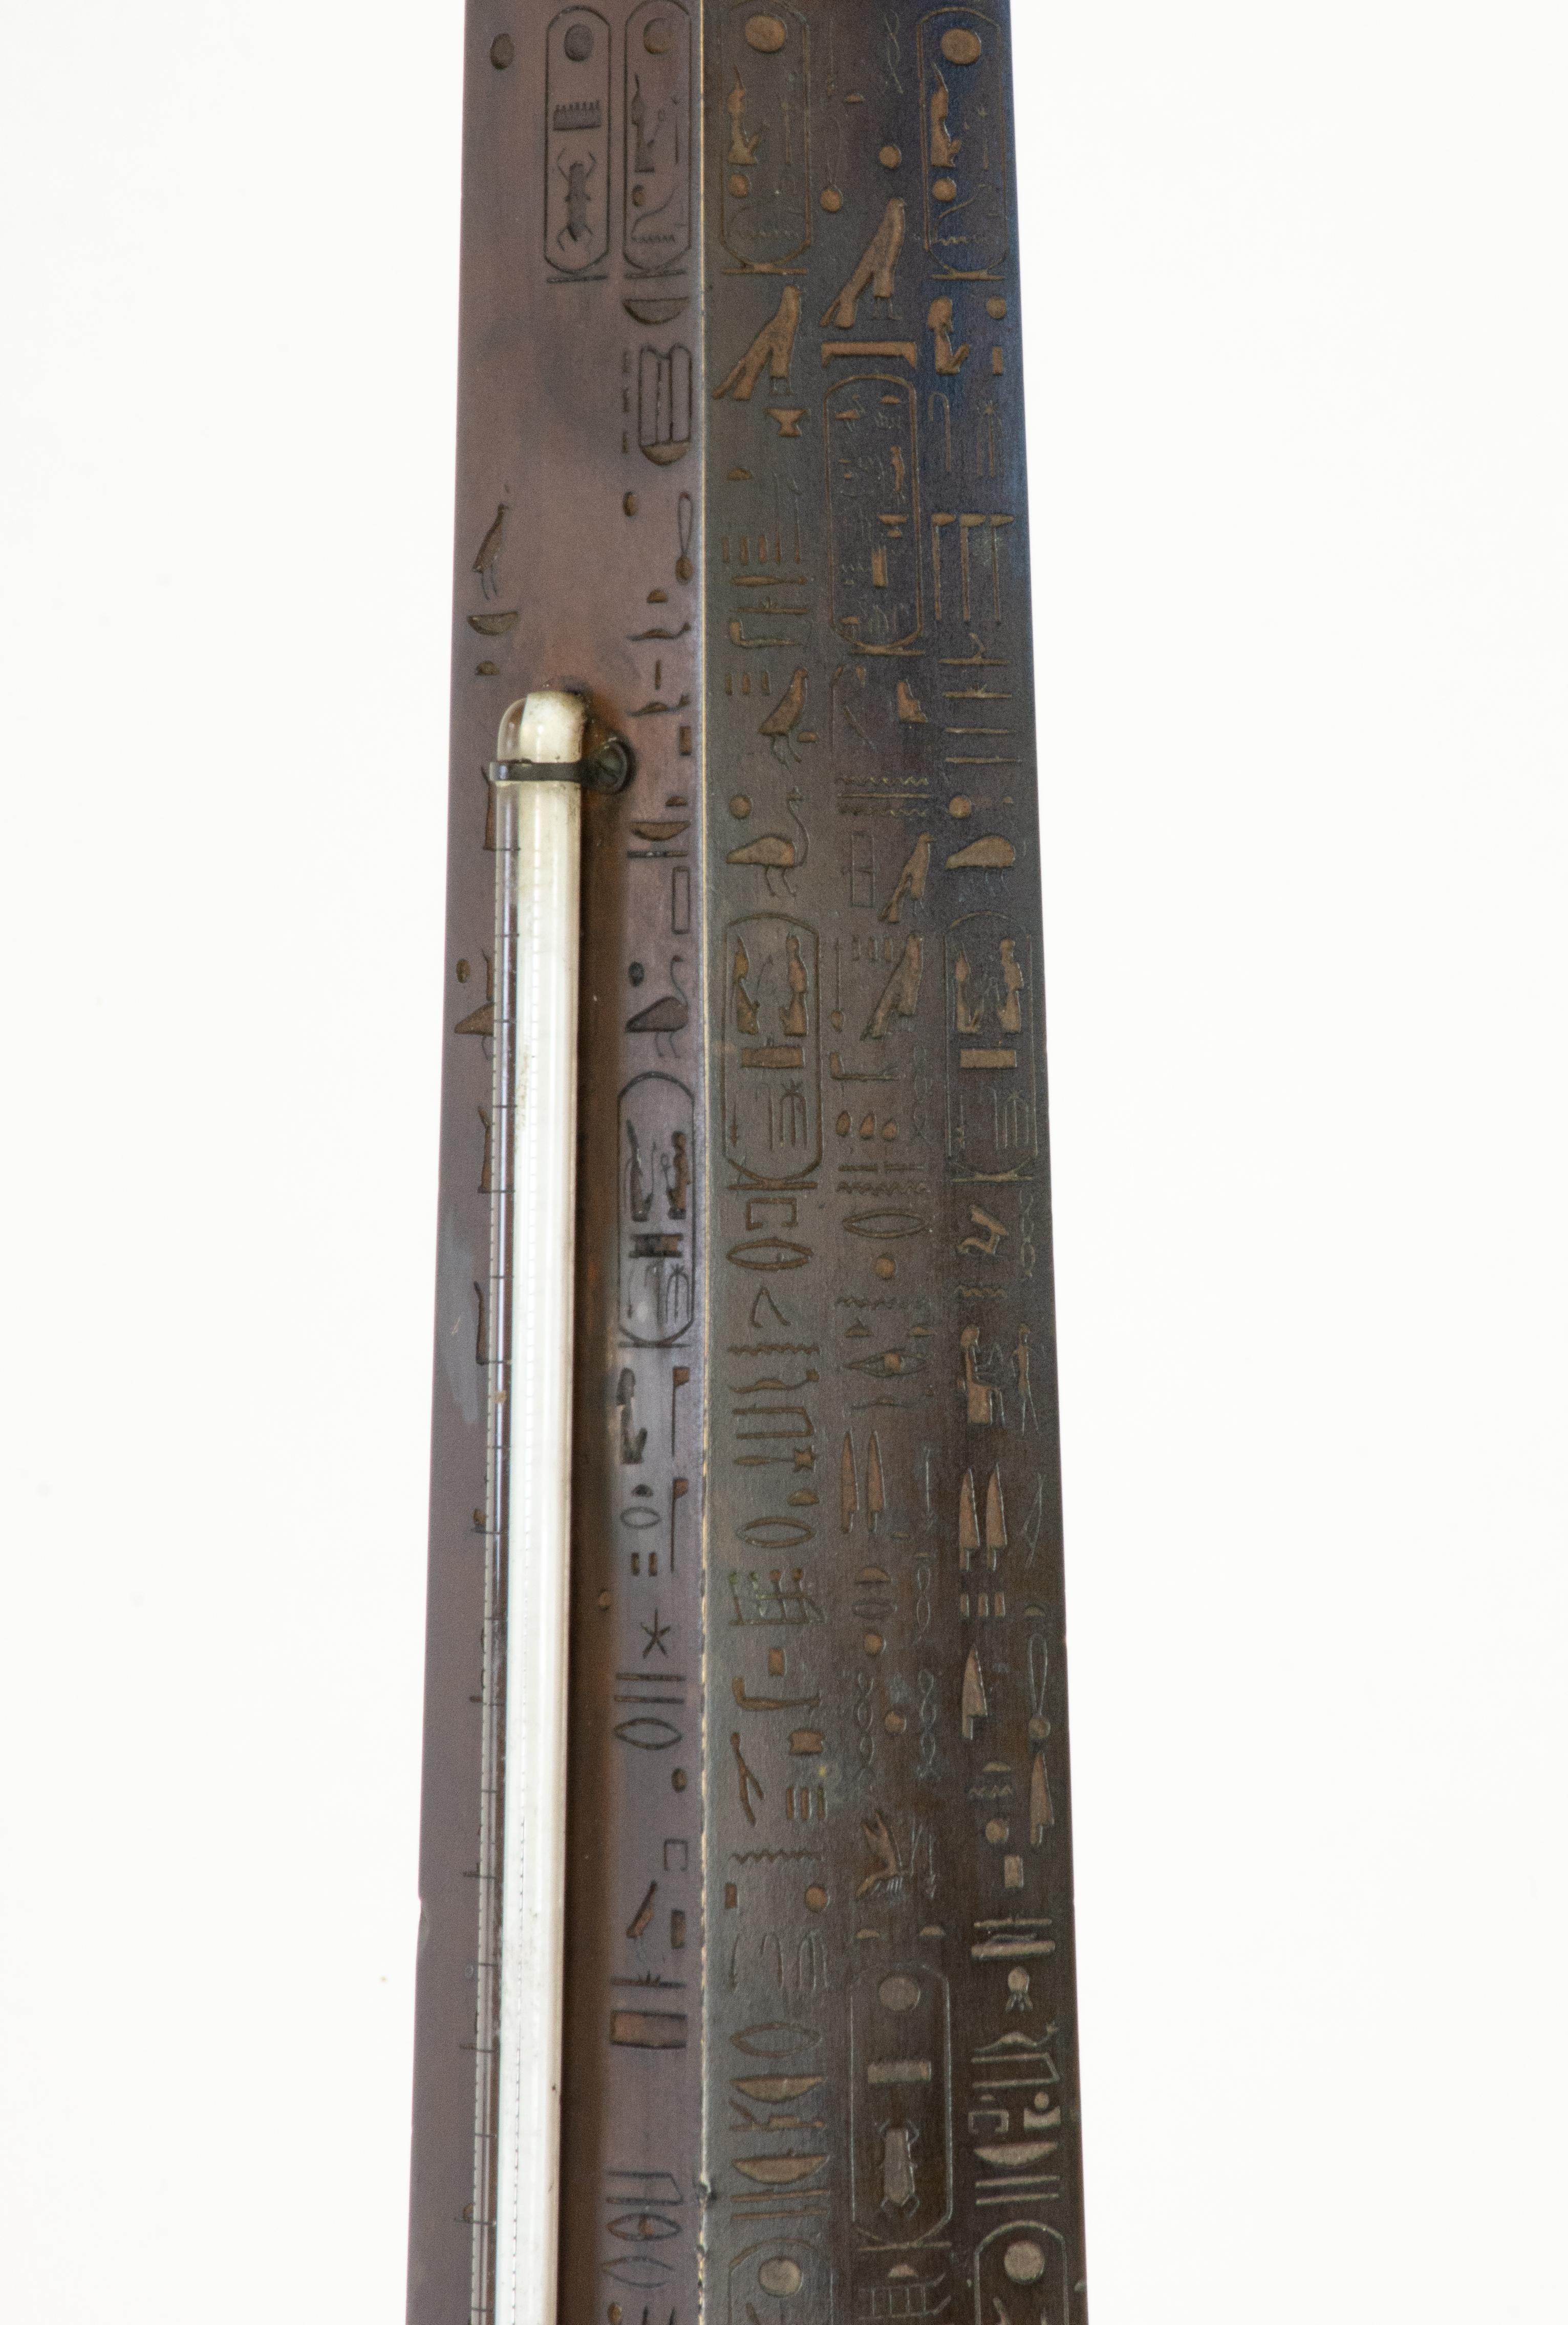 Tiffany & Co. 1881 Bronze Architectural Model of Cleopatra's Needle Obelisk, NY For Sale 4